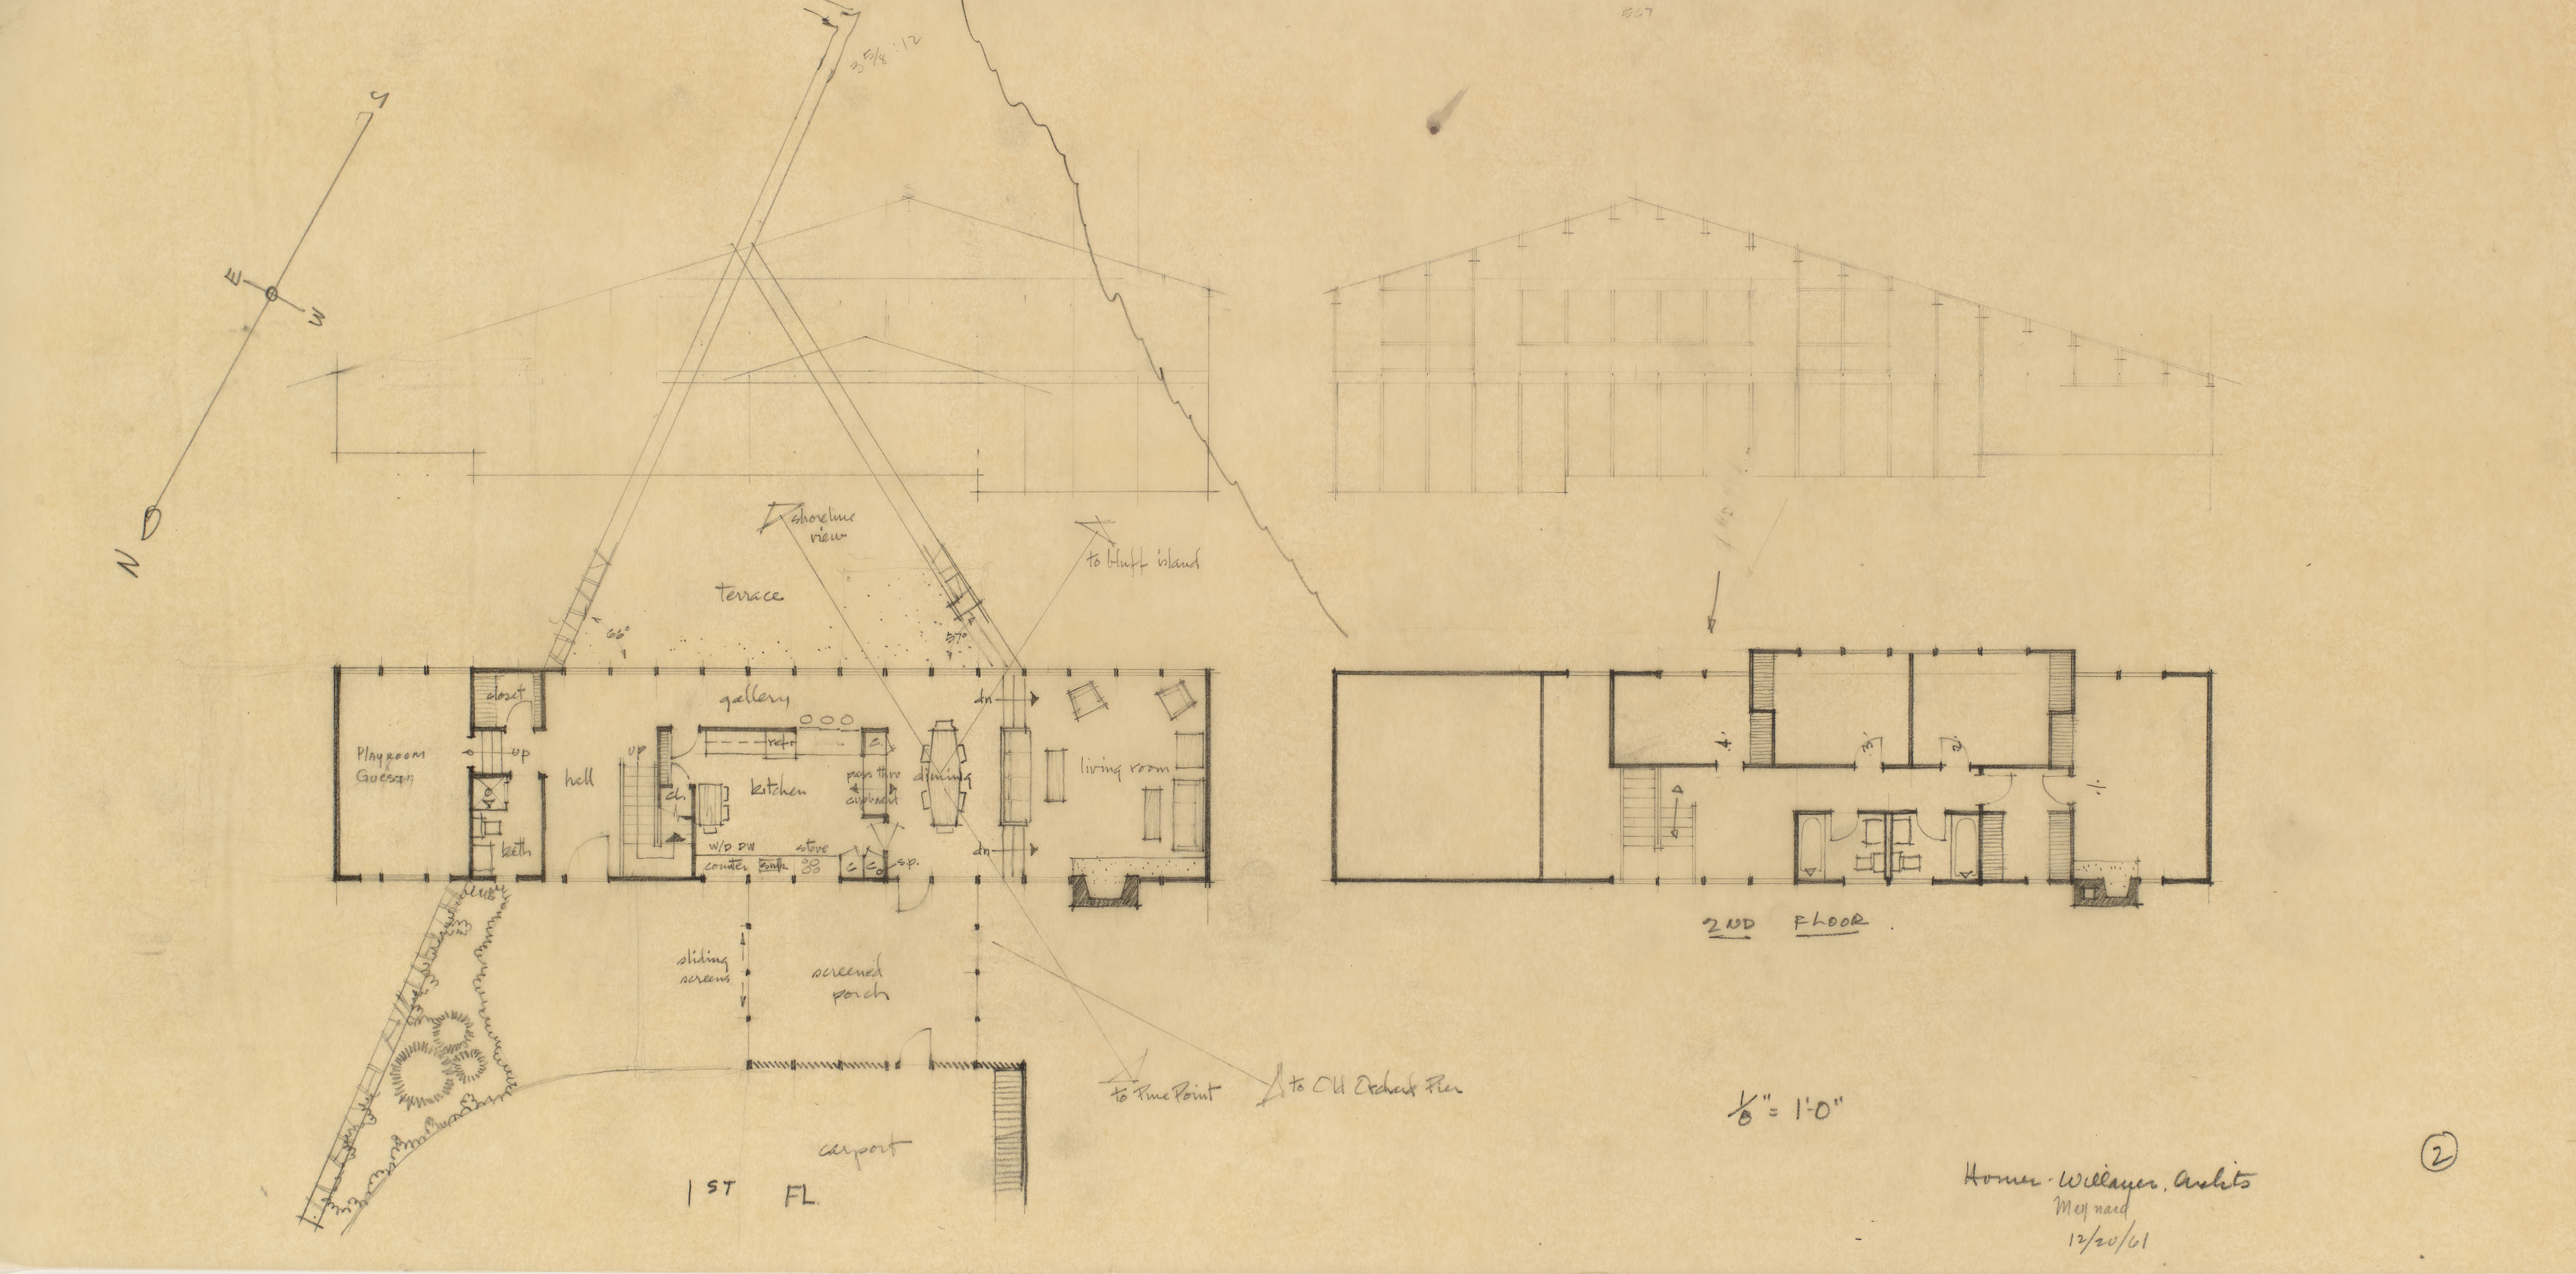 EPM Site and Floor Plans with Elevations, 1961, graphite on tracing paper, 14 x 28 inches